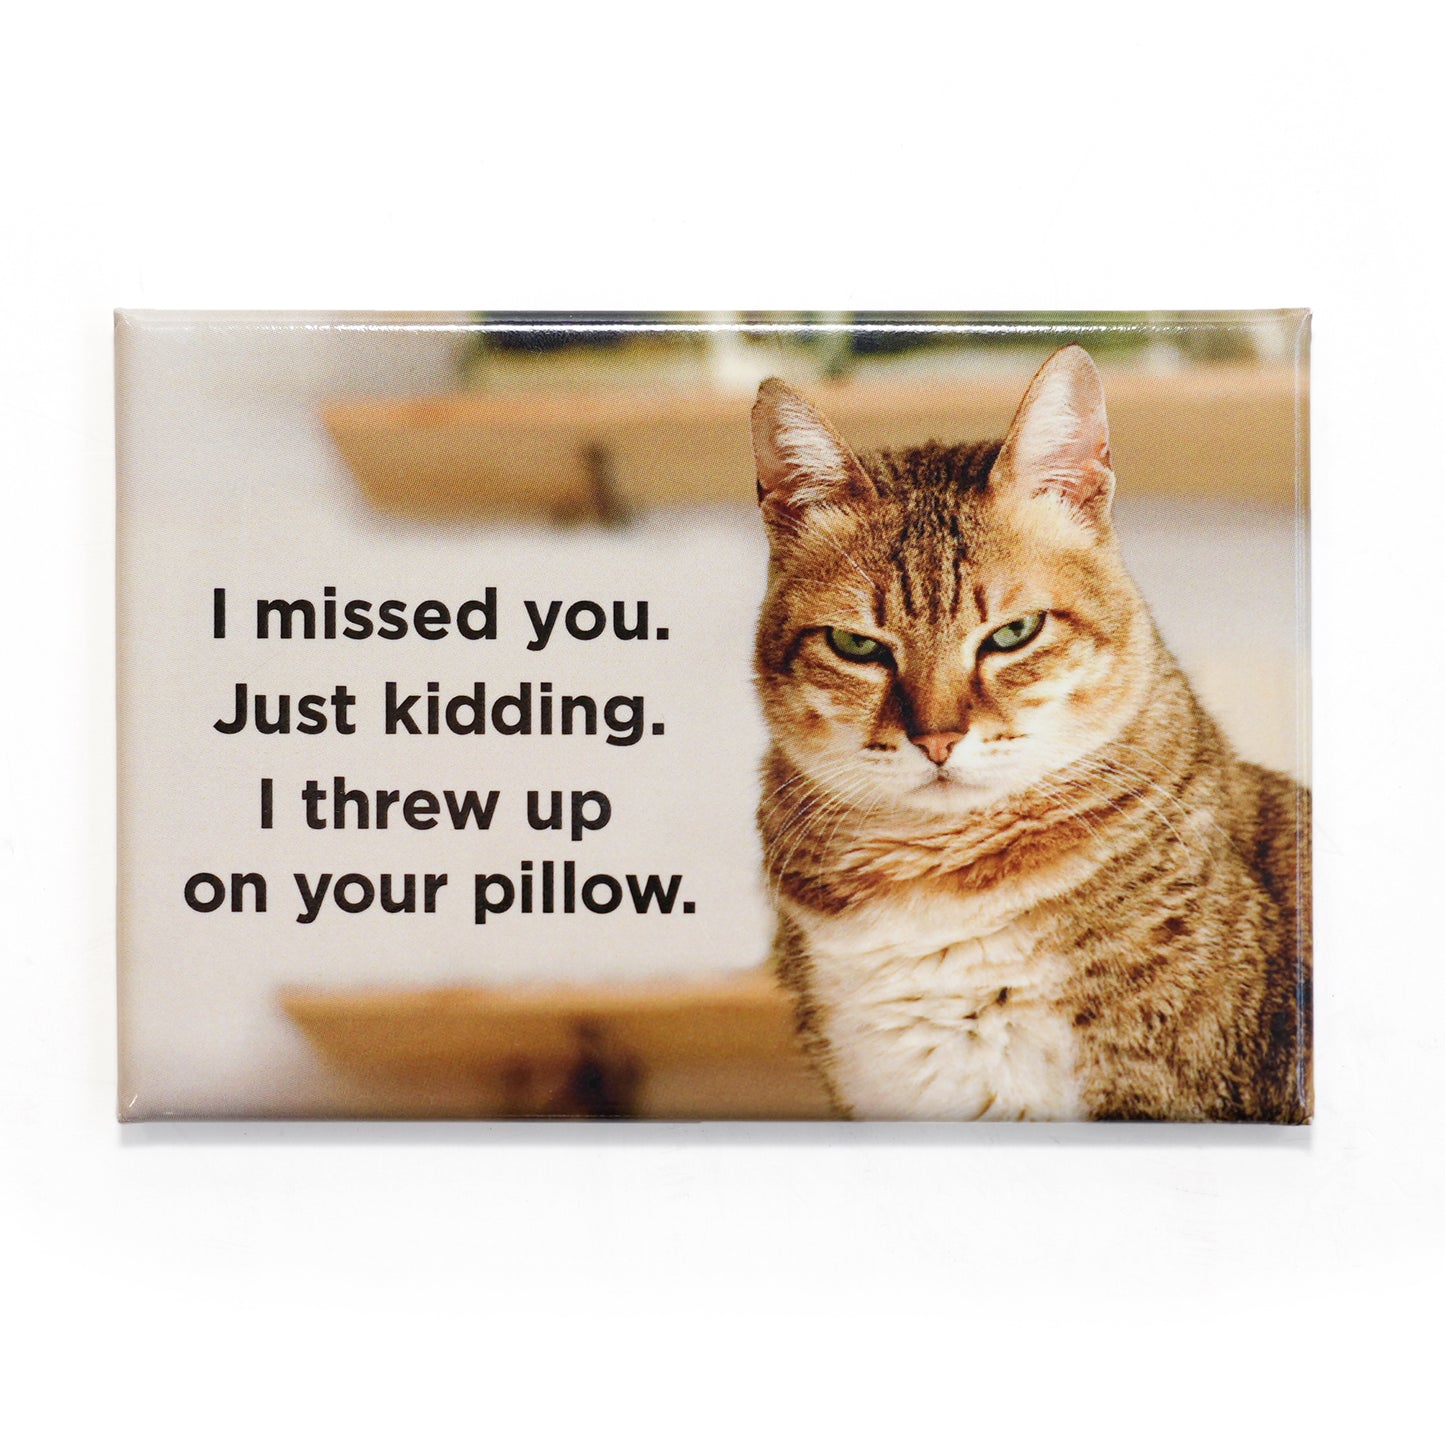 I Missed You. Just Kidding. I Threw Up on Your Pillow Magnet